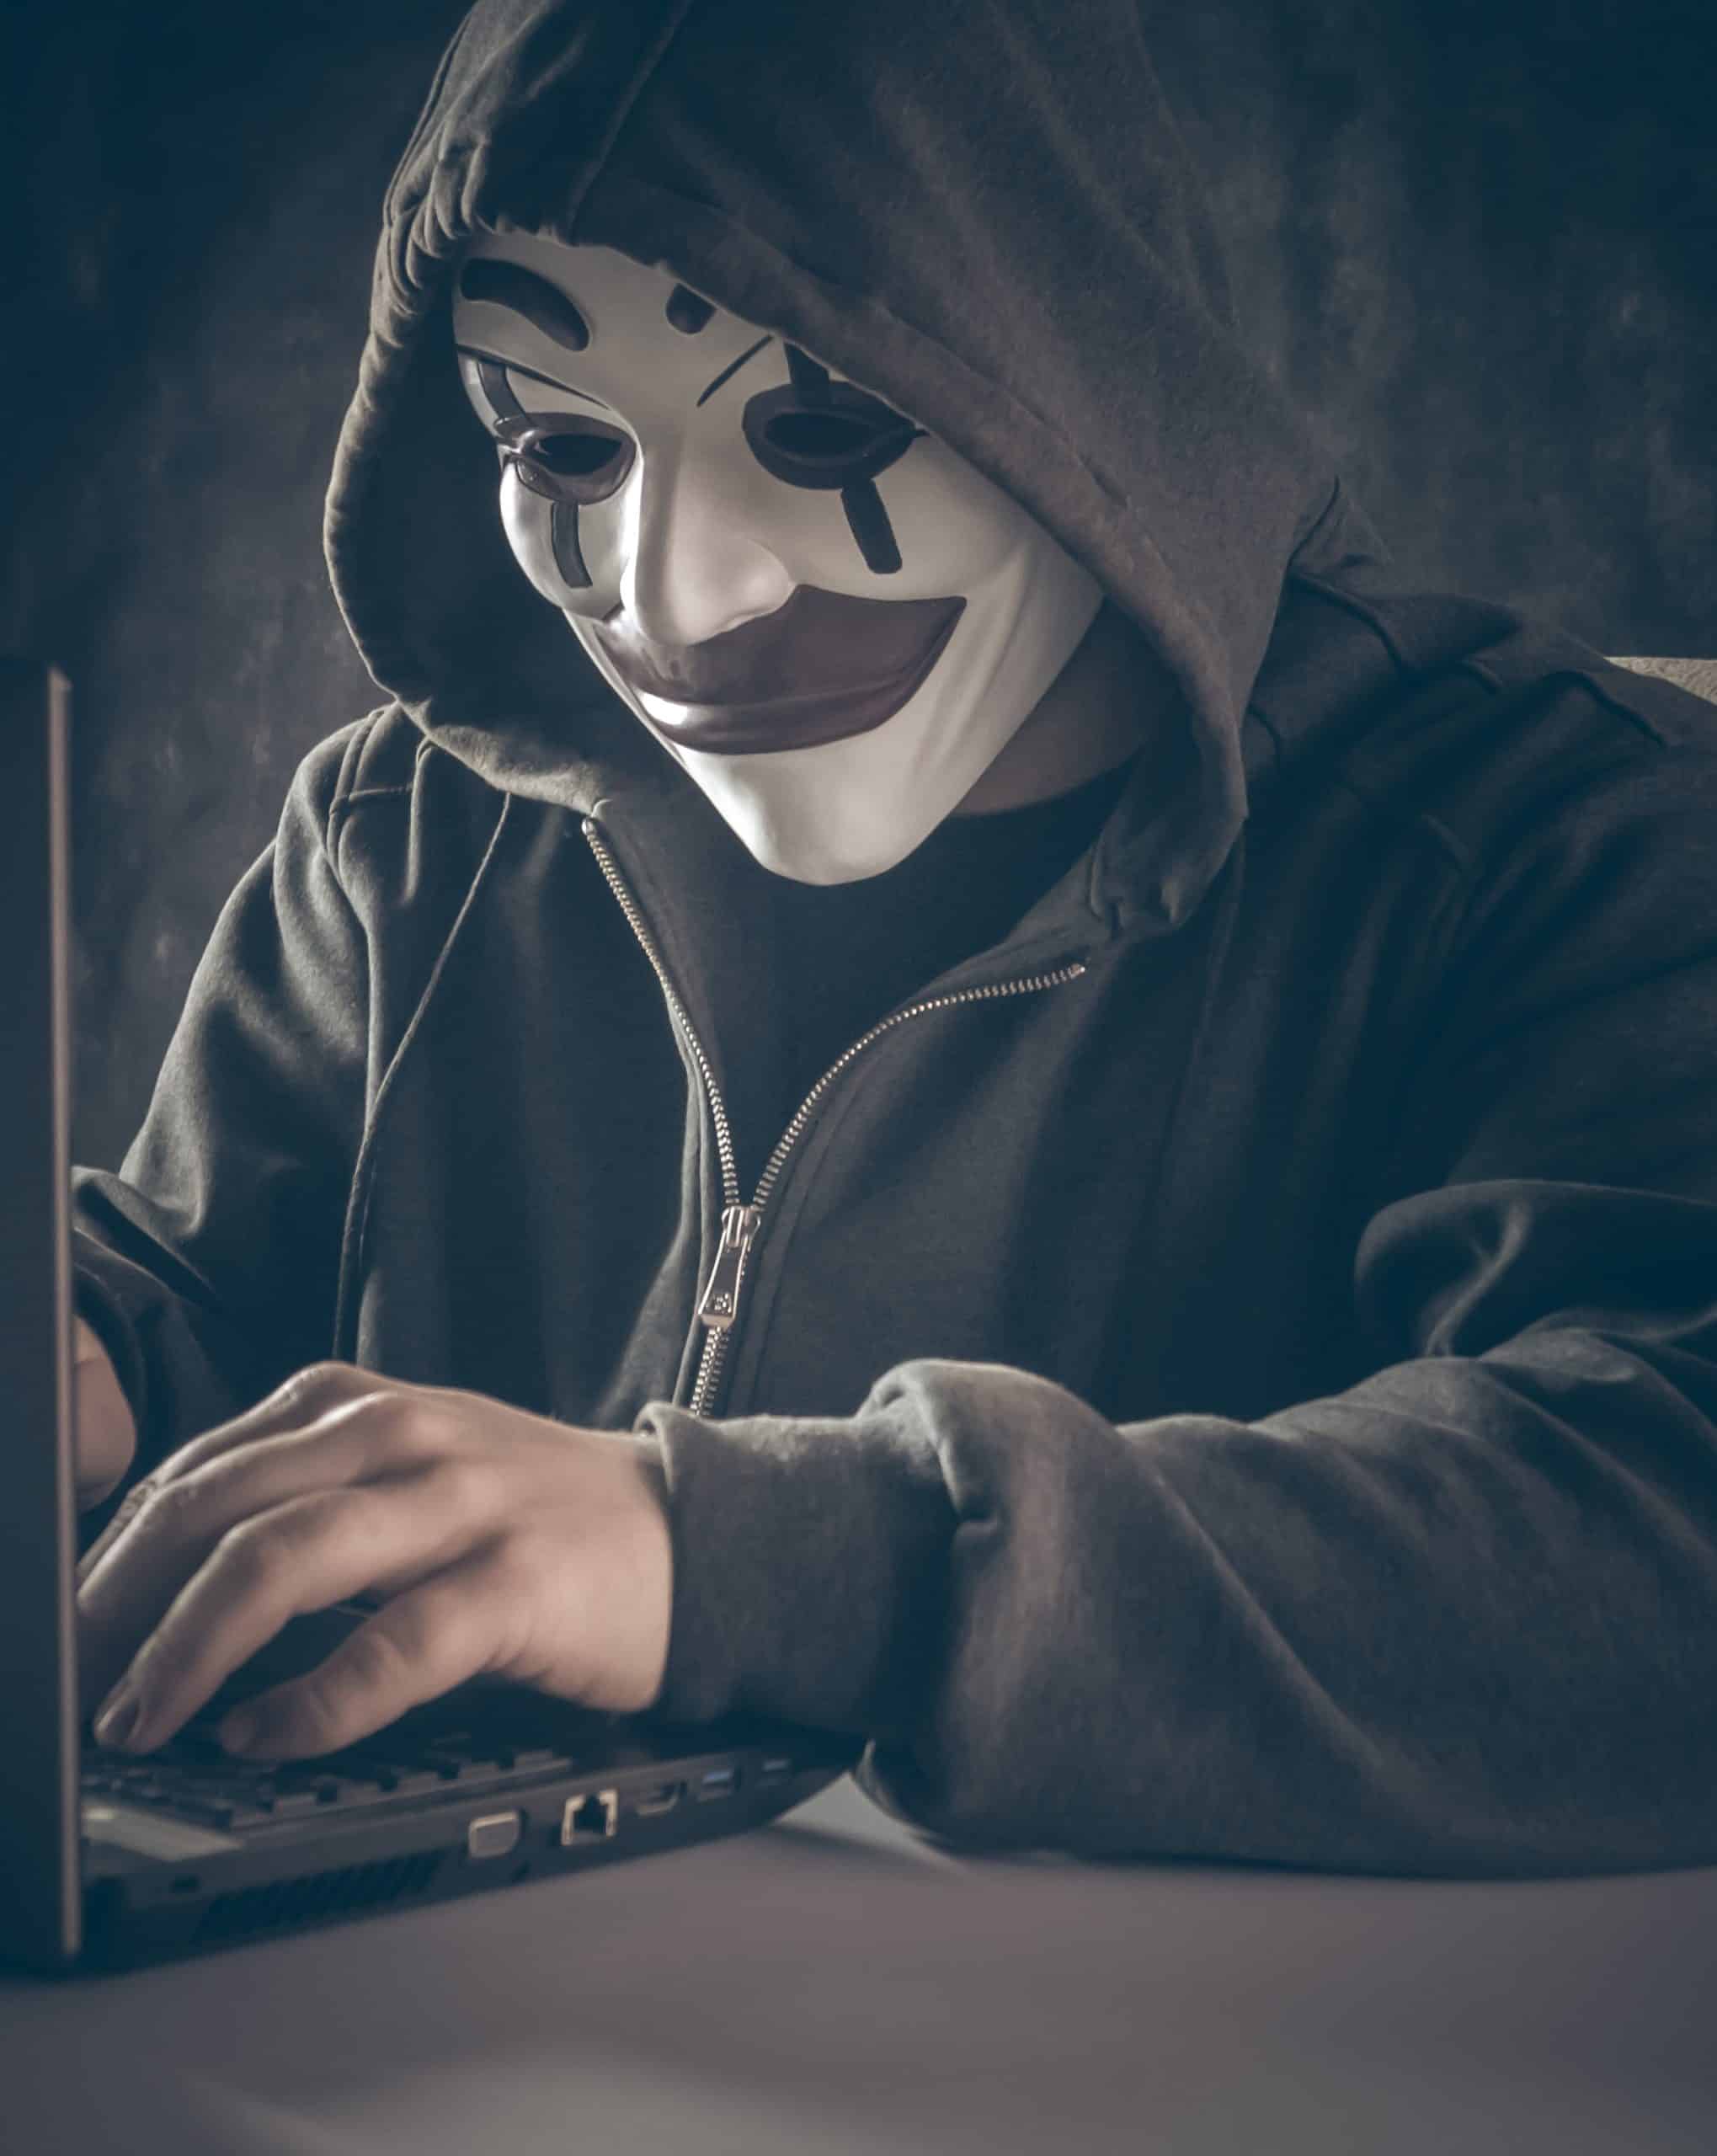 A disguised man committing fraud with a laptop, to illustrate for Occupational, Internal & Employee Fraud- What & Why, Pt. 1 of 2, by Rolf Neuweiler, a2zCFO.com